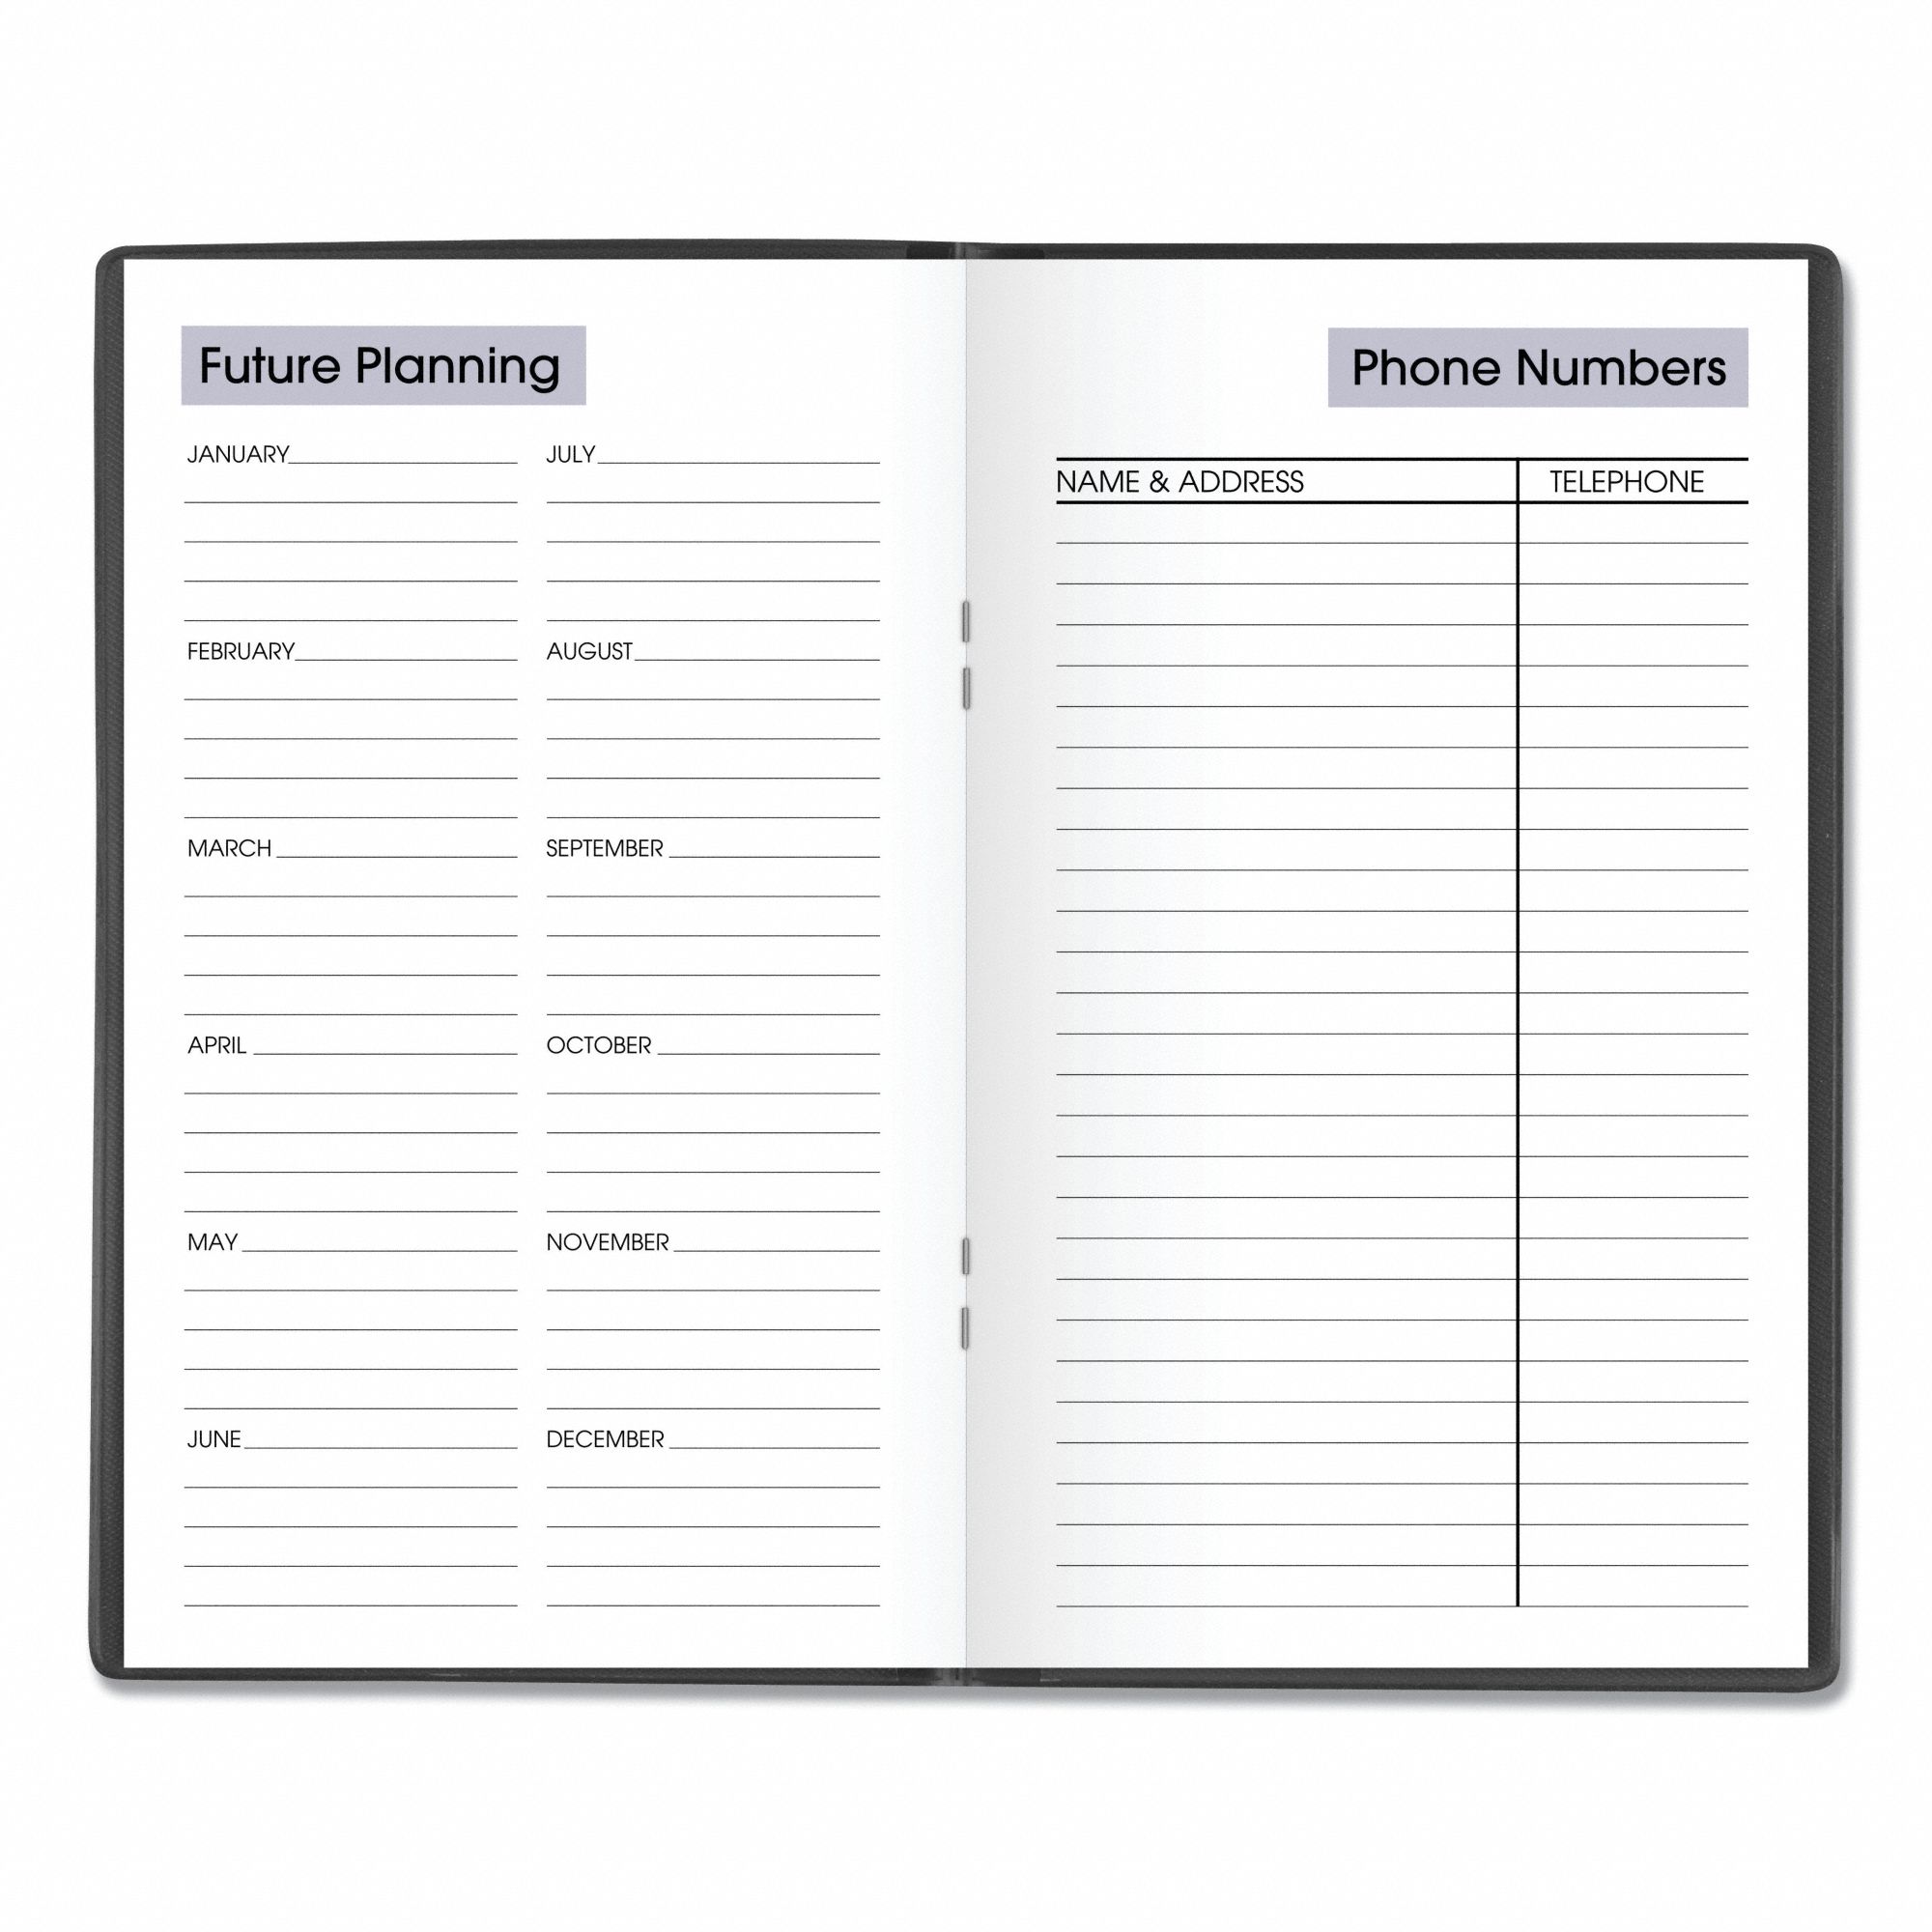 AT-A-GLANCE Planner: 3-1/2 in x 6-3/16 in Sheet Size, Weekly - 52DR16 ...